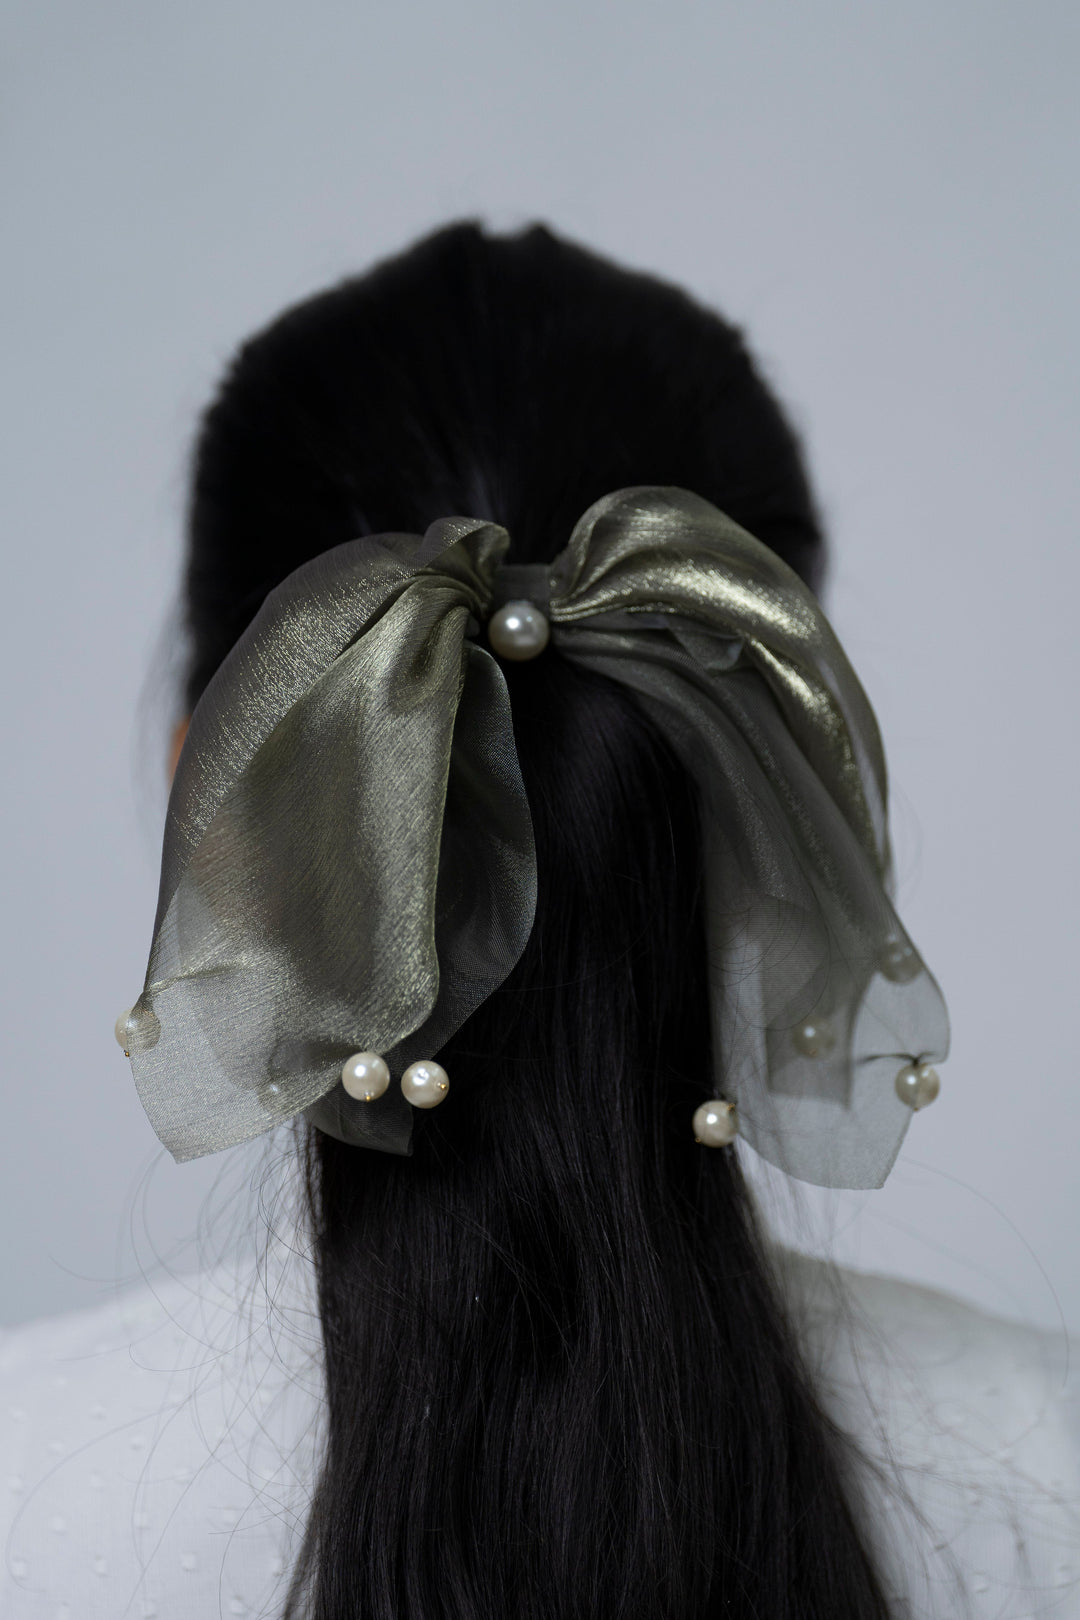 The Nesavu Scrunchies / Rubber Band Metallic Olive-Green Sheer Bow Hairband with Pearls Nesavu Green JHS25D Elegant Metallic Olive Sheer Bow Hairband with Pearls | Accessory for Stylish Outfits | The Nesavu